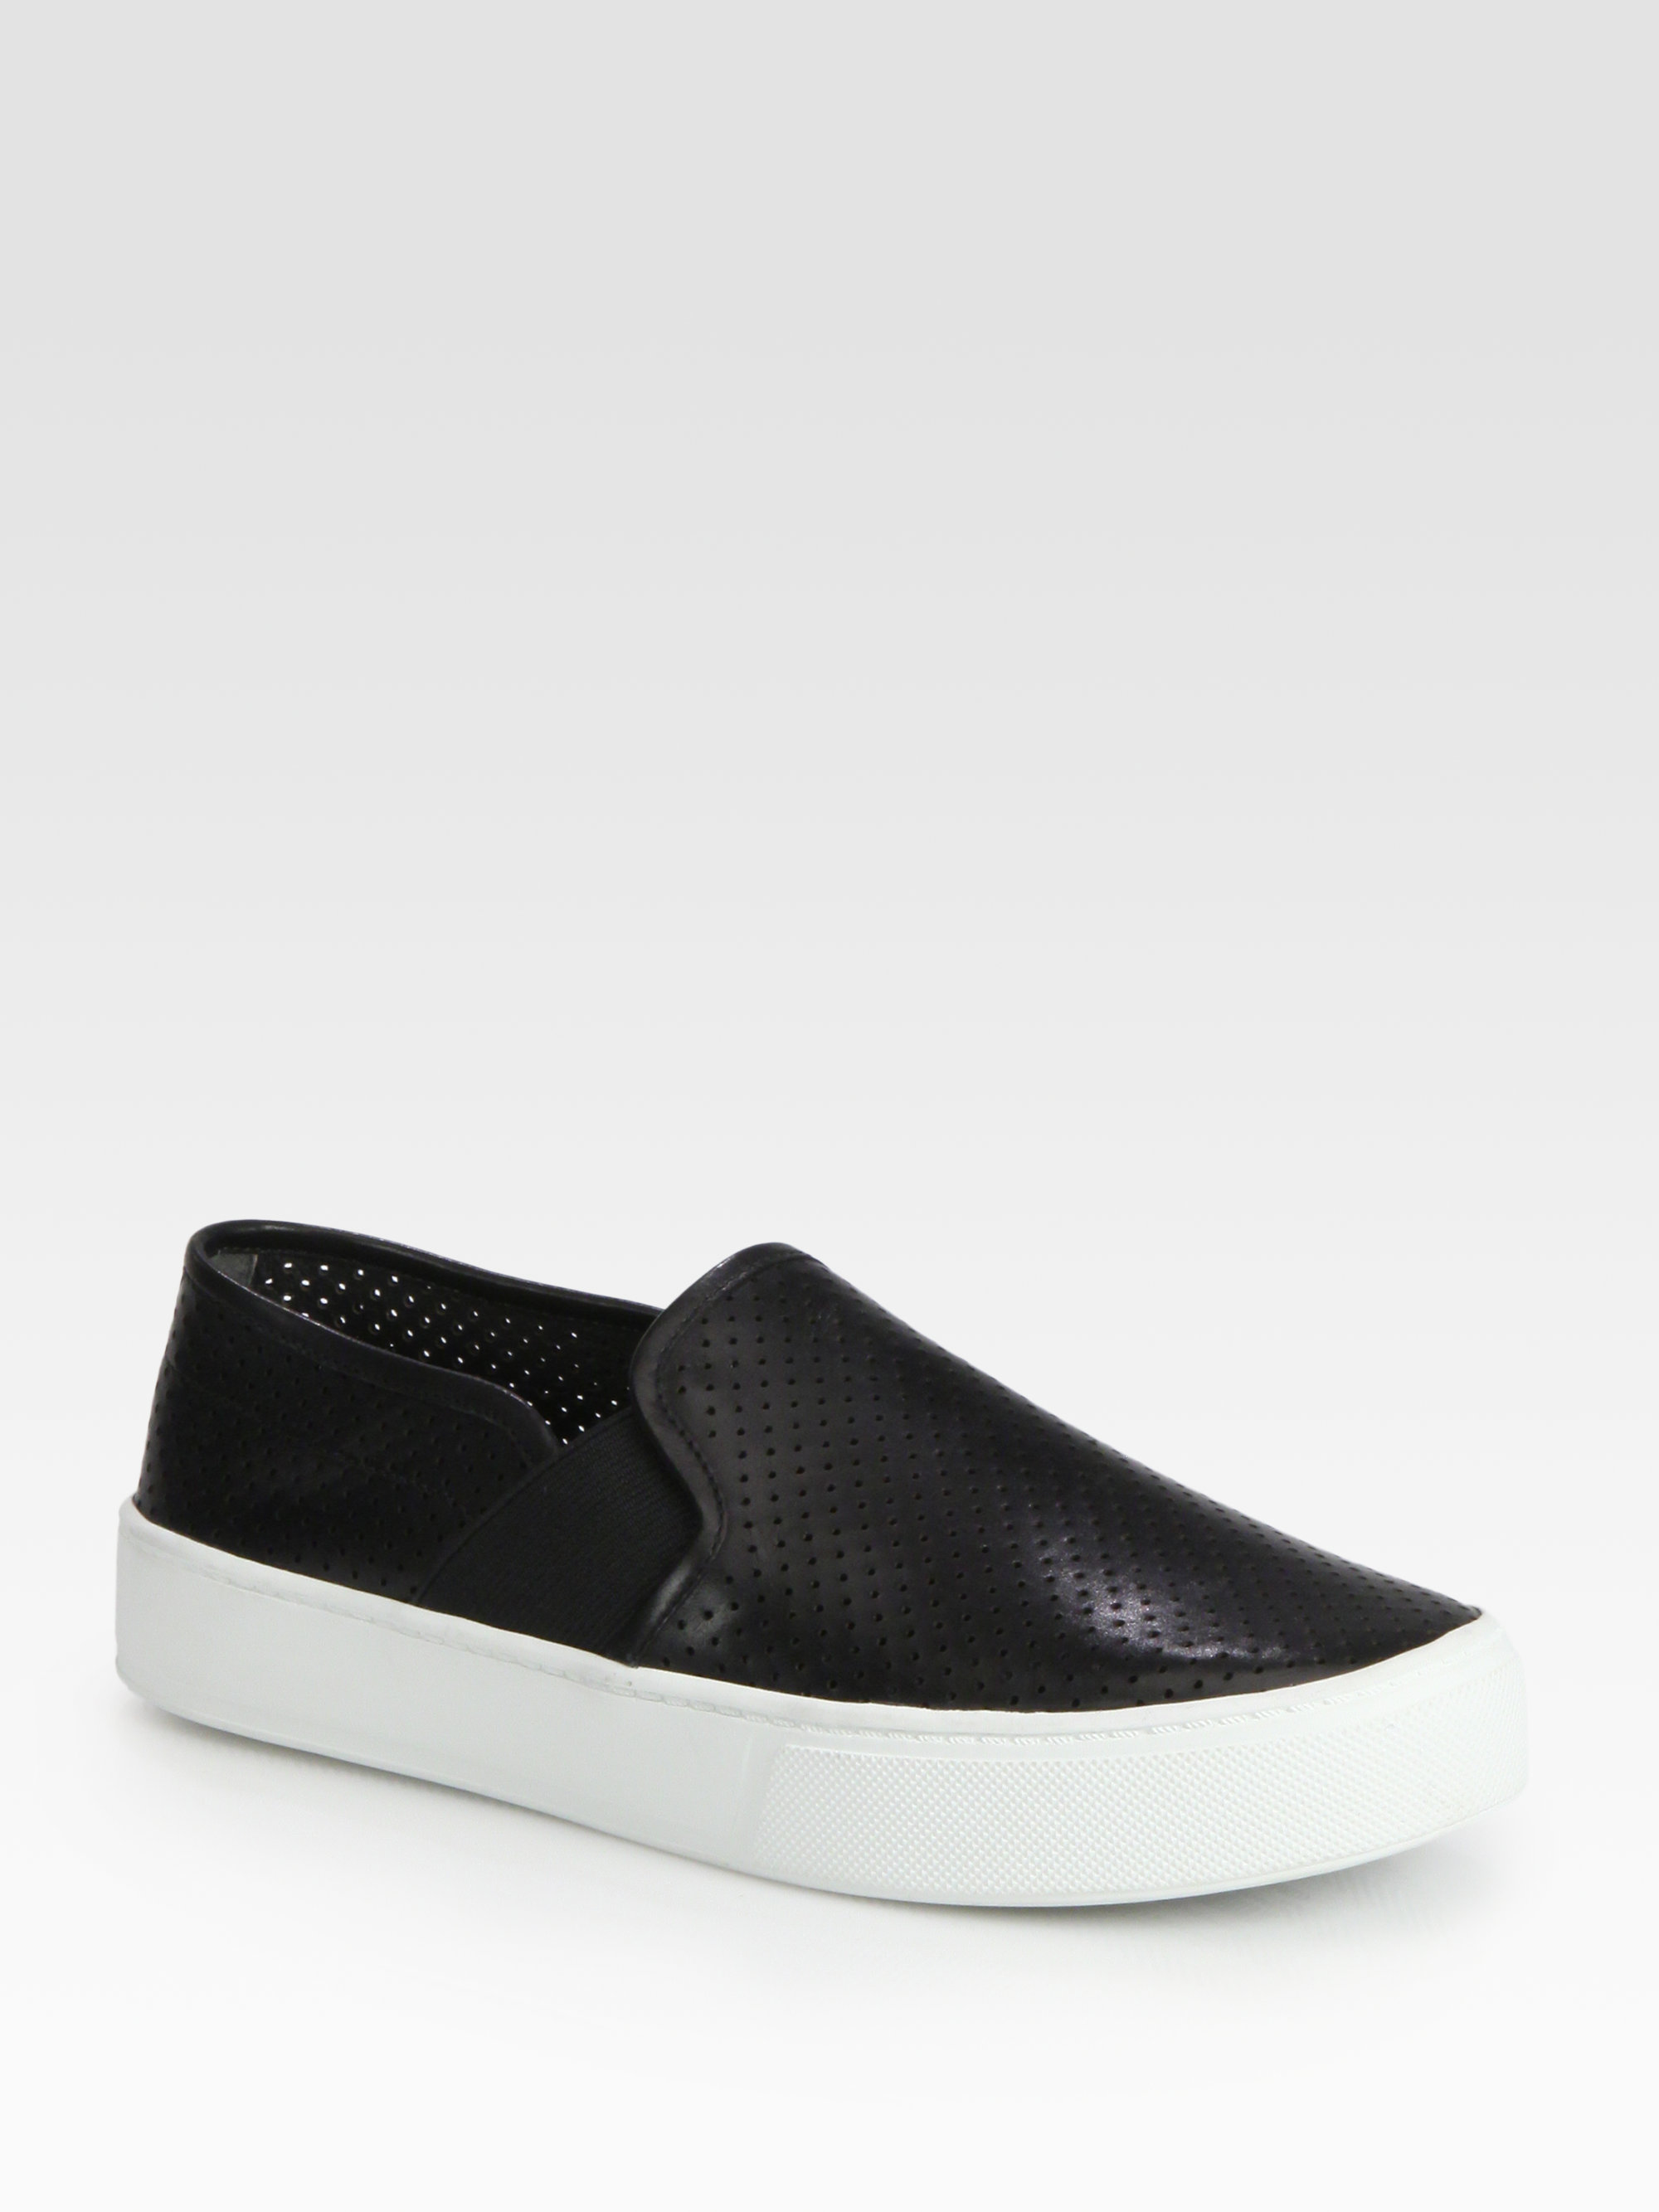 Vince Blair Perforated Leather Sneakers in Black | Lyst